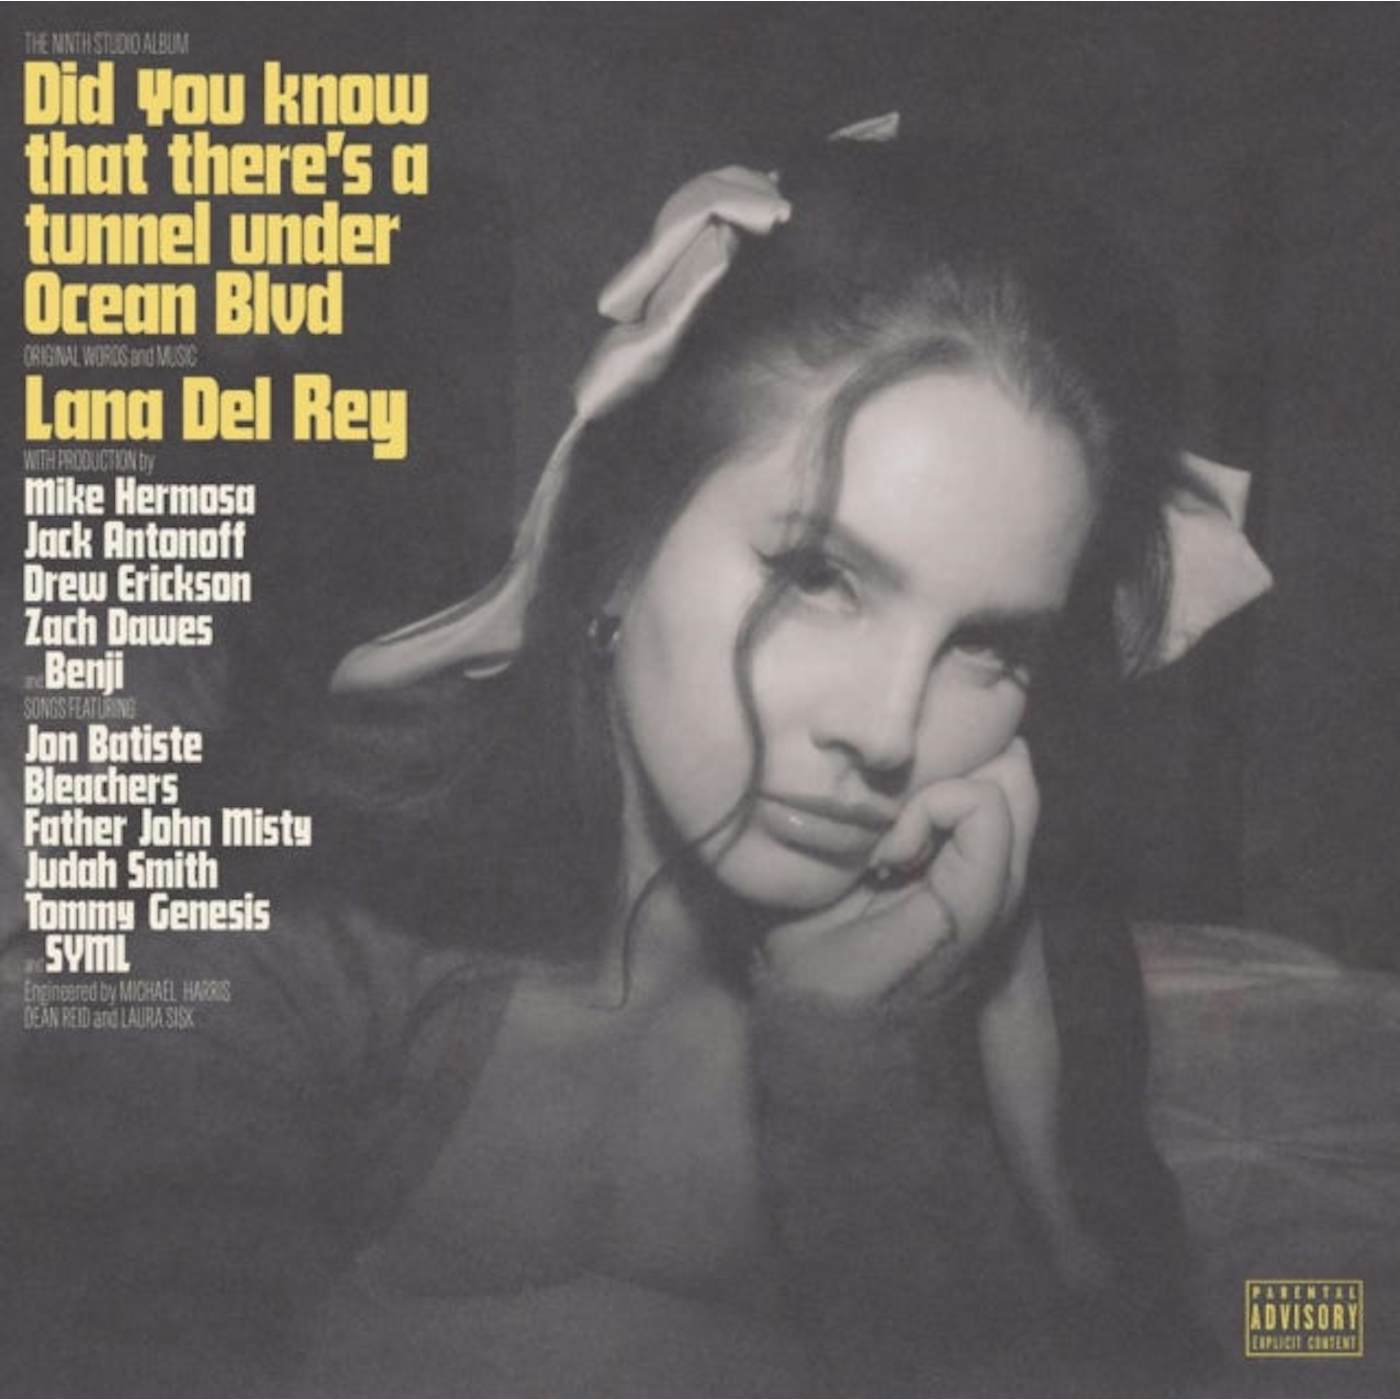 Lana Del Rey LP - Did You Know That There's A Tunnel Under Ocean Blvd (Vinyl)